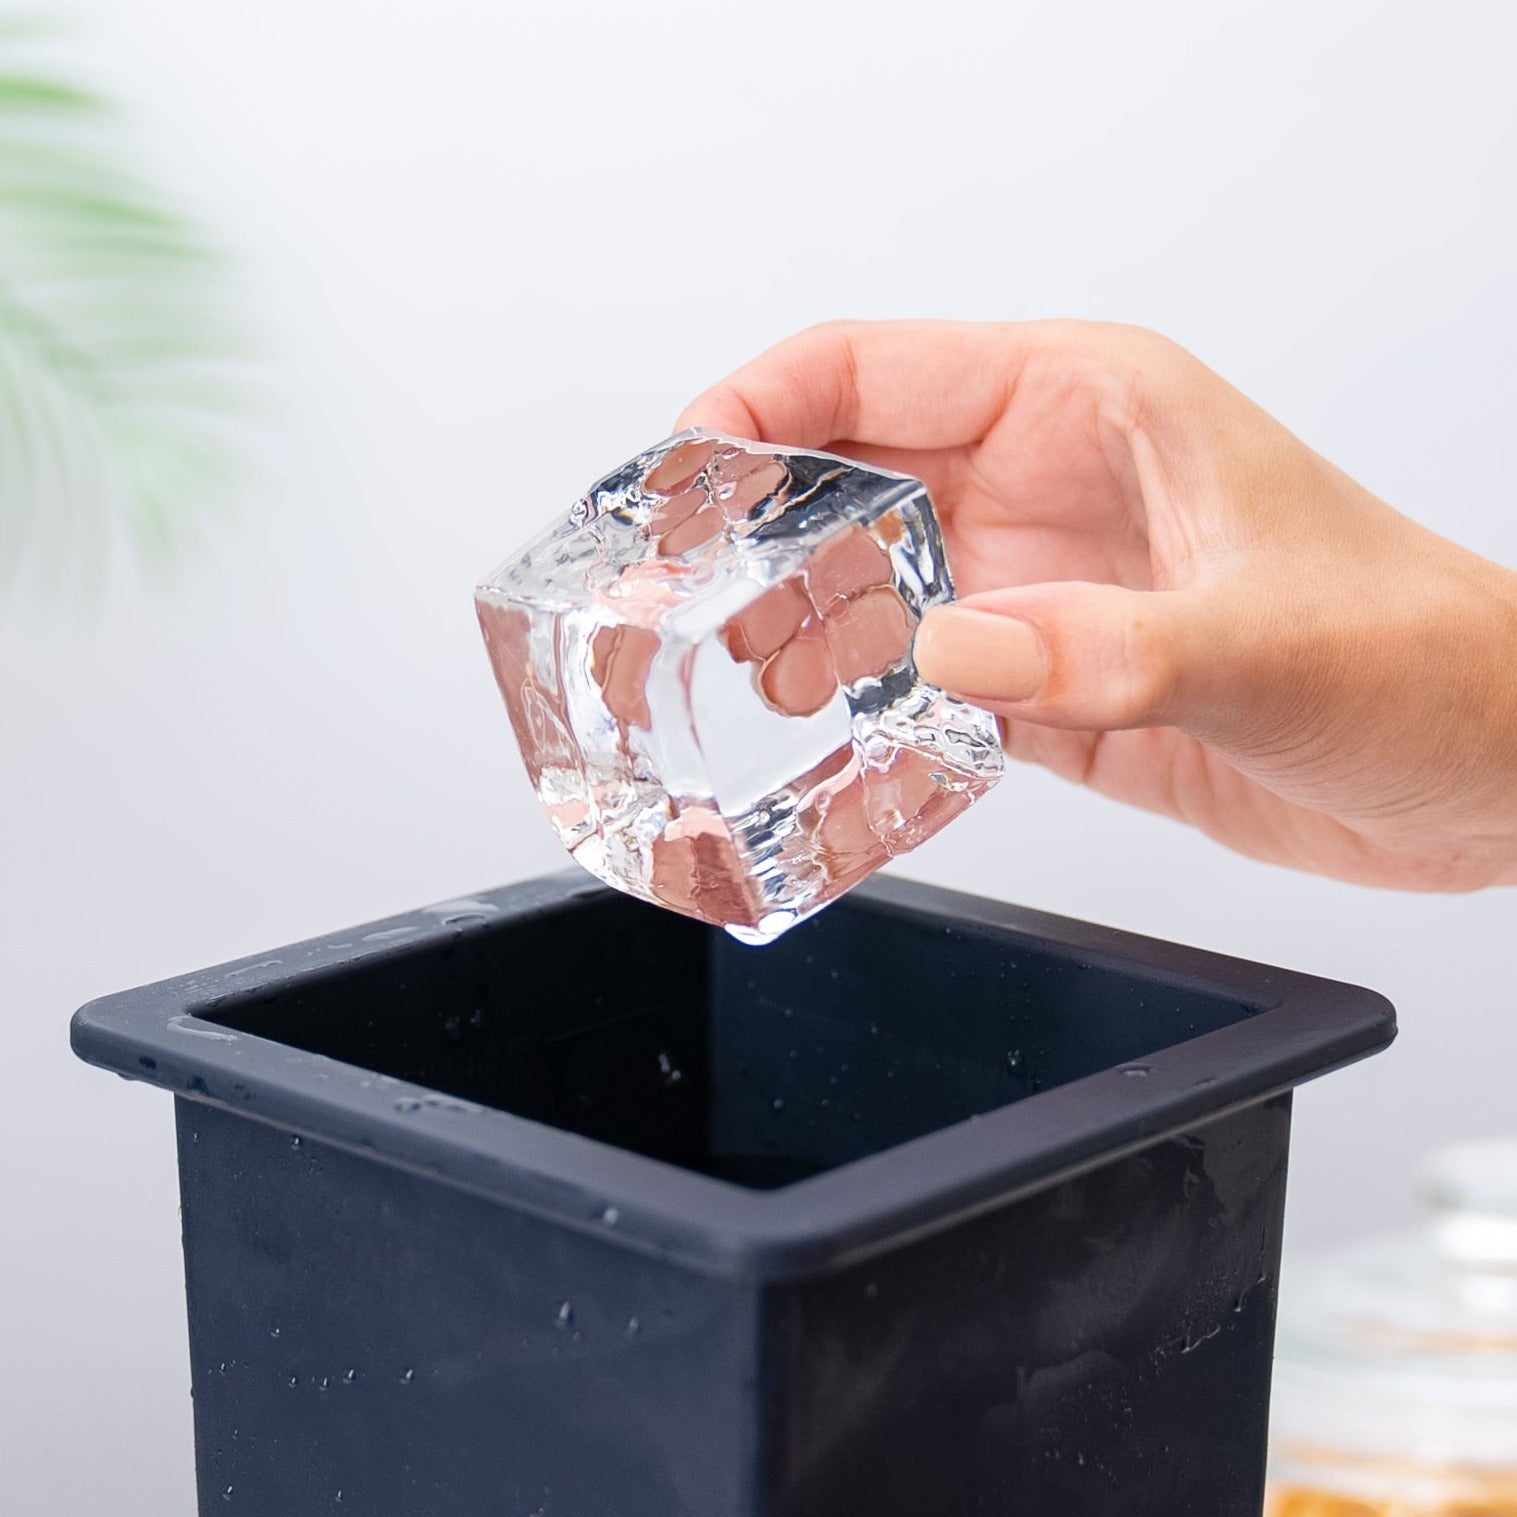 Ontherocks - Crystal-Clear Ice Cube Maker Make Big 2 inch Clear Cubes at Home